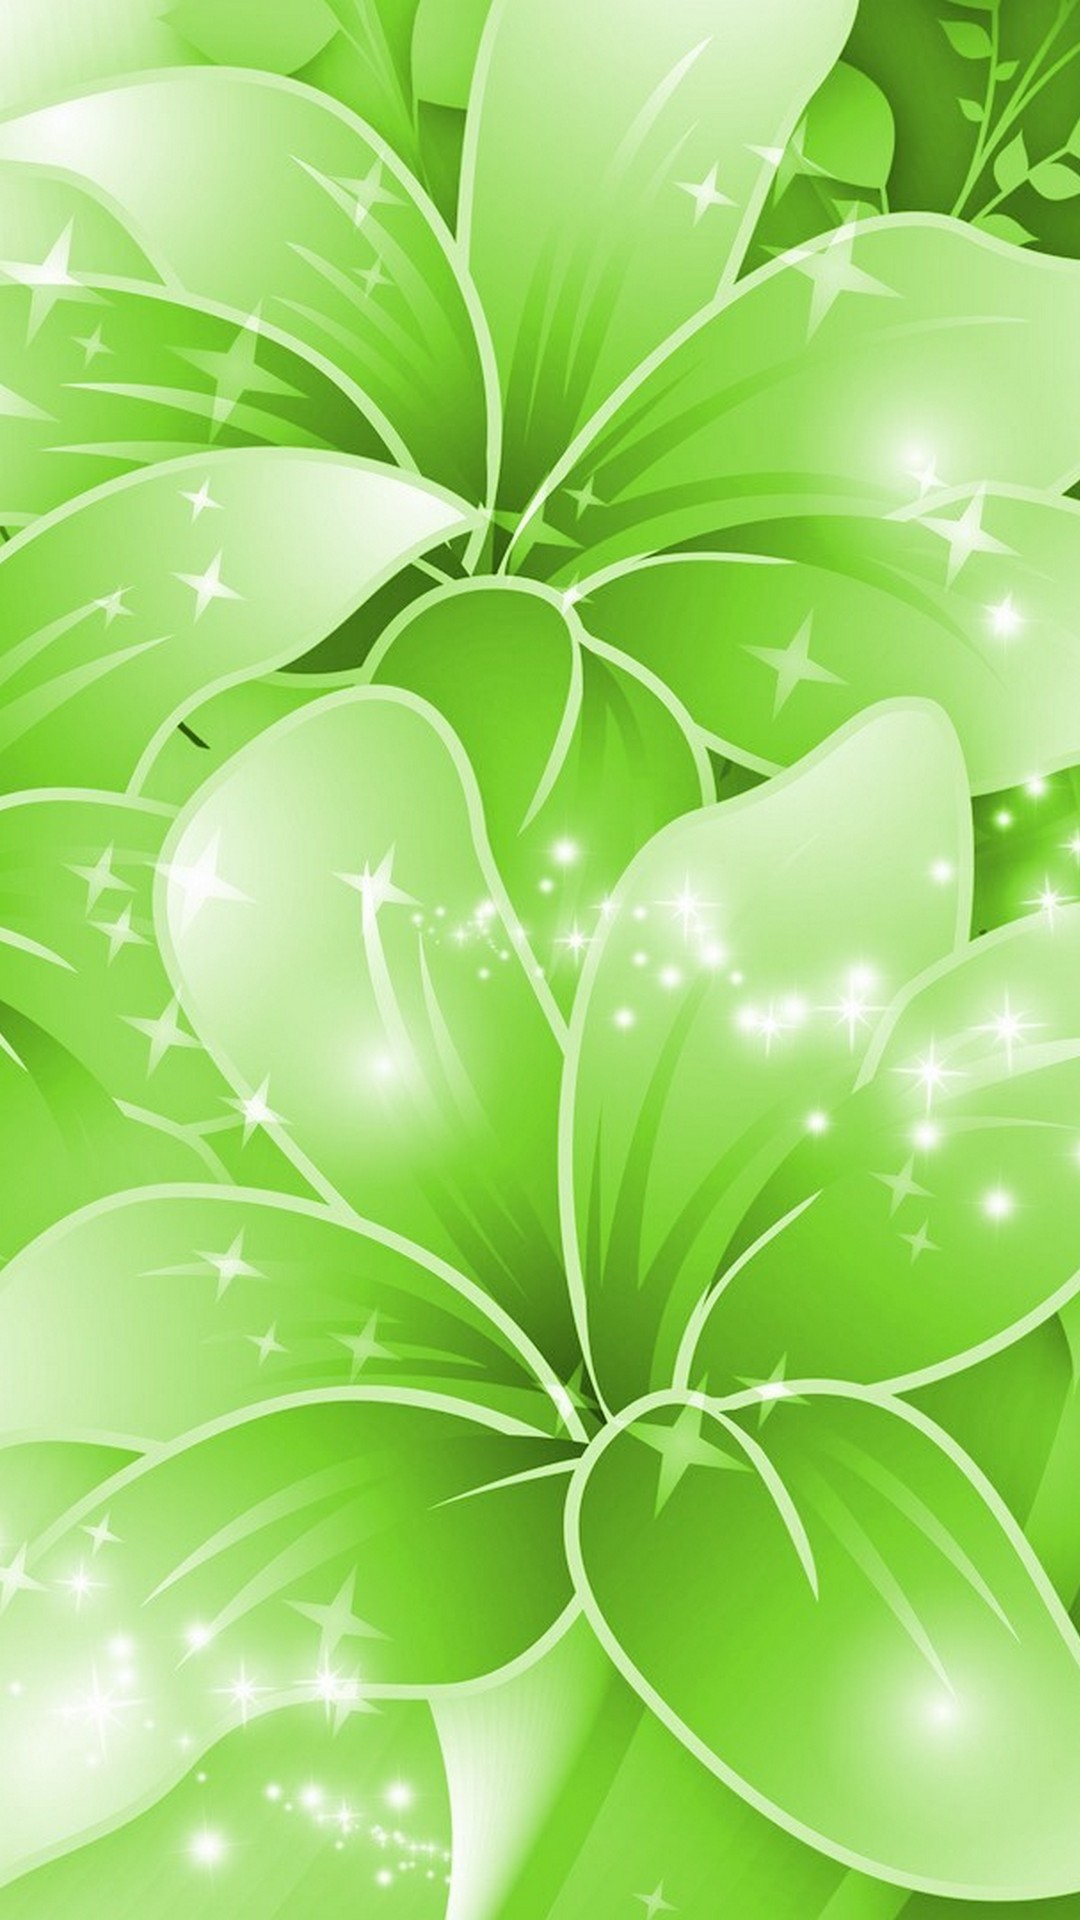 iPhone Wallpaper Light Green with image resolution 1080x1920 pixel. You can make this wallpaper for your iPhone 5, 6, 7, 8, X backgrounds, Mobile Screensaver, or iPad Lock Screen